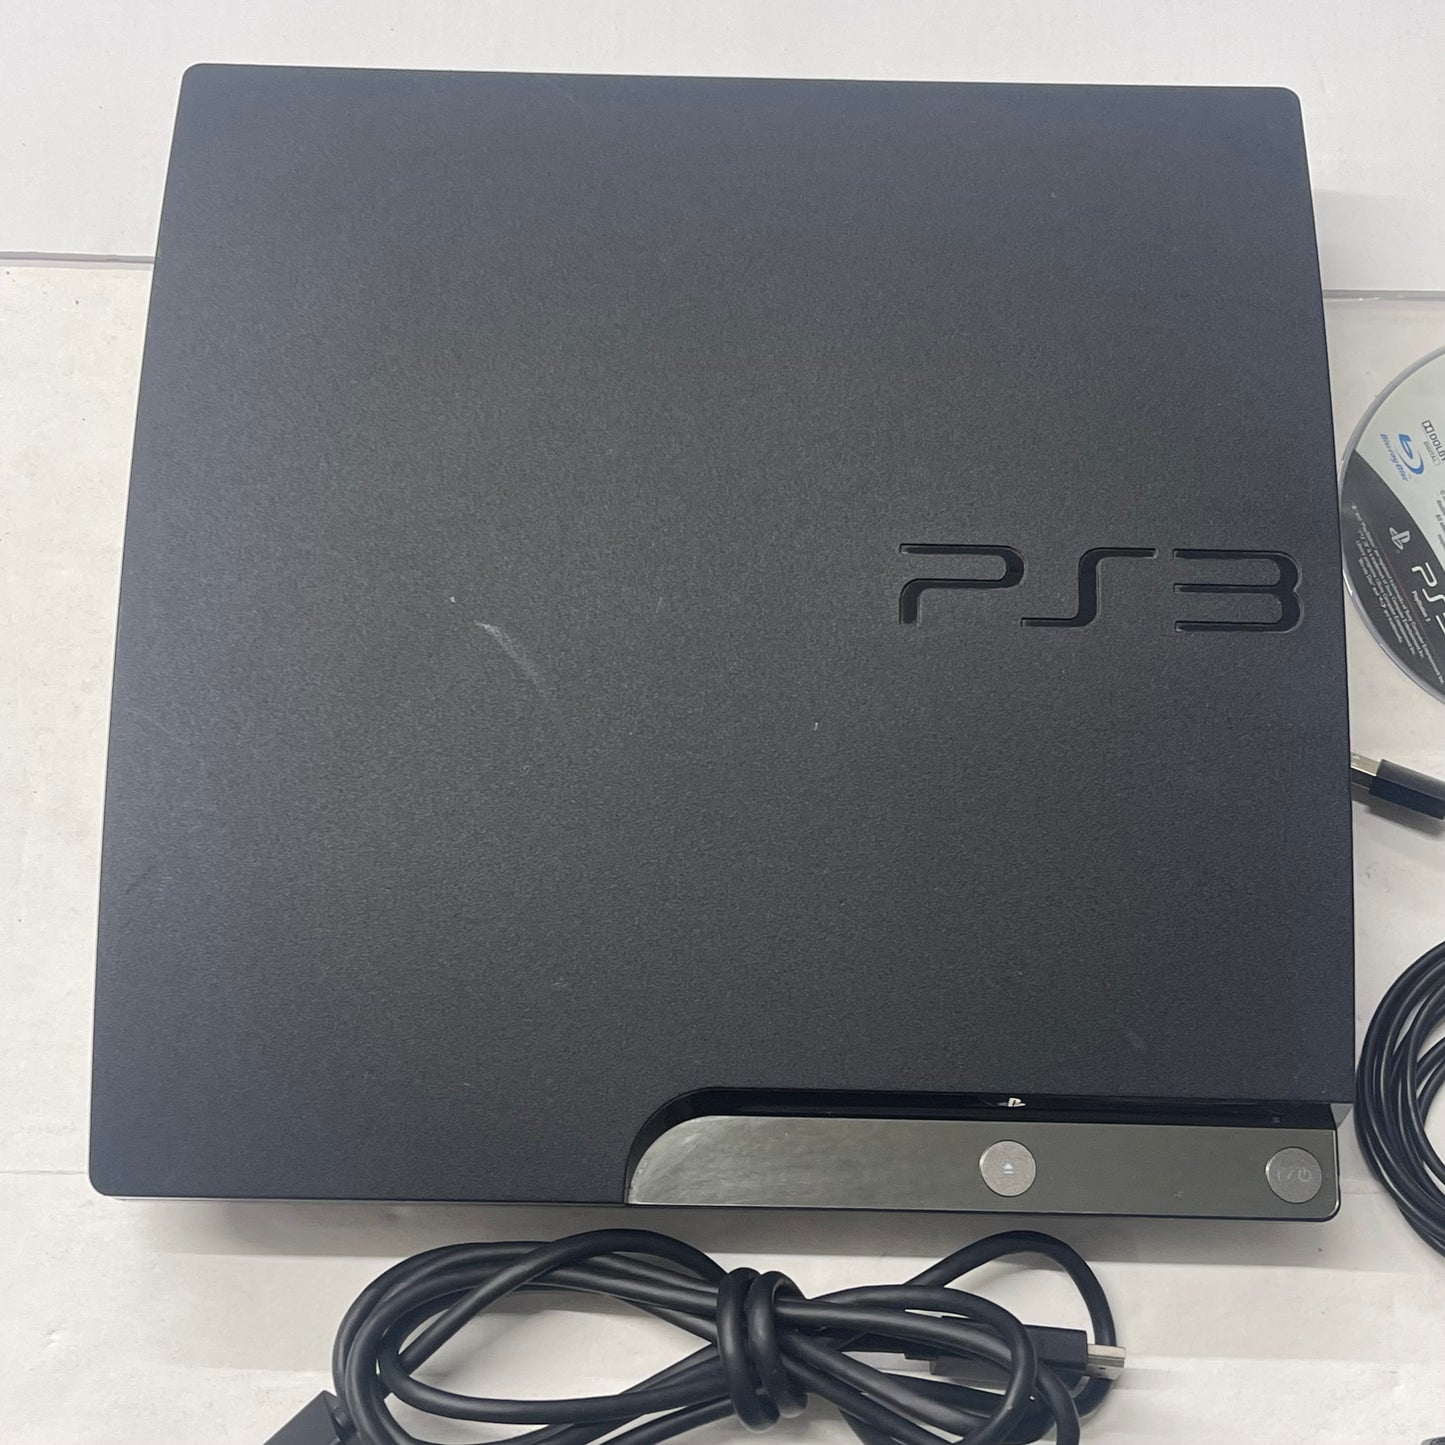 Ps3 - Slim Console 160gb W/ Cables Controller & Game PlayStation 3 Tested #2783